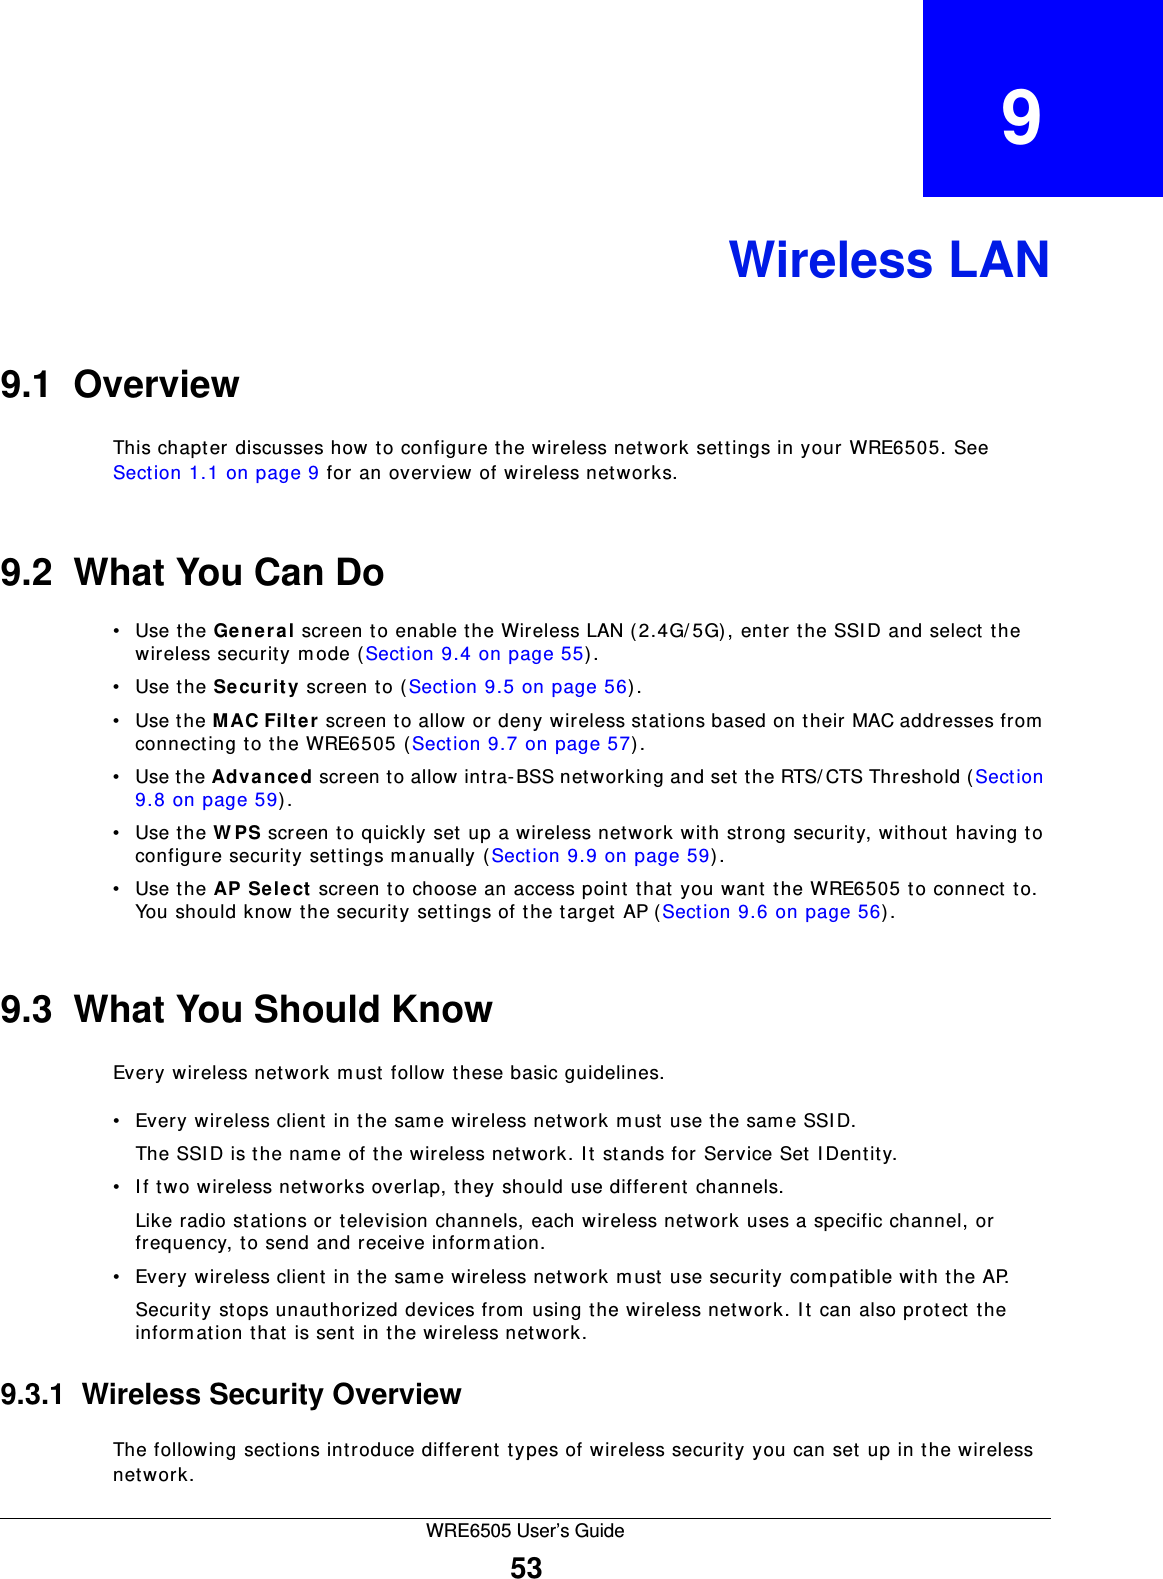 WRE6505 User’s Guide53CHAPTER   9Wireless LAN9.1  OverviewThis chapter discusses how to configure the wireless network settings in your WRE6505. See Section 1.1 on page 9 for an overview of wireless networks.9.2  What You Can Do• Use the Gen er al screen to enable the Wireless LAN (2.4G/ 5G), enter the SSID and select the wireless security m ode (Section 9.4 on page 55).• Use the Secu rit y screen to (Section 9.5 on page 56).• Use the M AC Filt e r screen to allow or deny wireless stations based on their MAC addresses from  connecting to the WRE6505 (Section 9.7 on page 57).• Use the Adva nced screen to allow intra-BSS networking and set the RTS/ CTS Threshold ( Section 9.8 on page 59).• Use the W PS screen to quickly set up a wireless network with strong security, without having to configure security settings m anually (Section 9.9 on page 59) .• Use the AP Select screen to choose an access point that you want the WRE6505 to connect to. You should know the security settings of the target AP (Section 9.6 on page 56).9.3  What You Should KnowEvery wireless network m ust follow these basic guidelines.• Every wireless client in the same wireless network m ust use the same SSID.The SSID is the name of the wireless network. I t stands for Service Set I Dentity.• If two wireless networks overlap, they should use different channels.Like radio stations or television channels, each wireless network uses a specific channel, or frequency, to send and receive inform ation.• Every wireless client in the same wireless network m ust use security compatible with the AP.Security stops unauthorized devices from using the wireless network. I t can also protect the information that is sent in the wireless network.9.3.1  Wireless Security OverviewThe following sections introduce different types of wireless security you can set up in the wireless network.